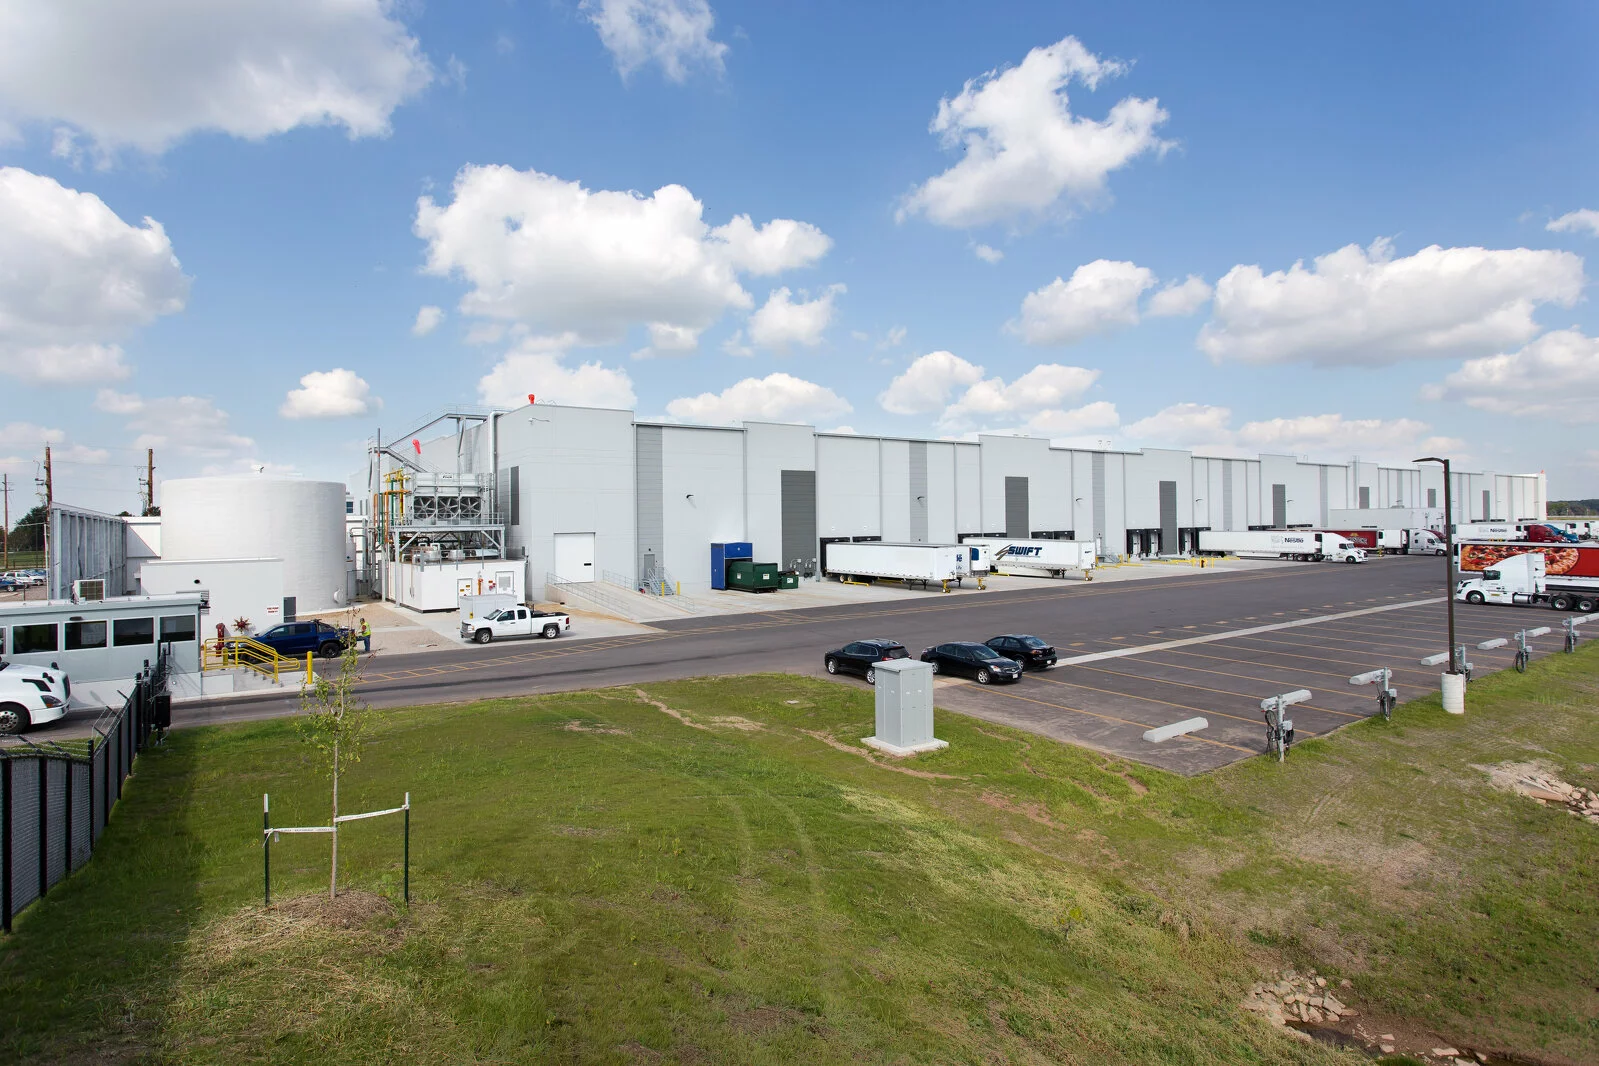 Exterior Nestle Facility, distribution bays, parking in front of facility, photo taken on a sunny day with clouds.